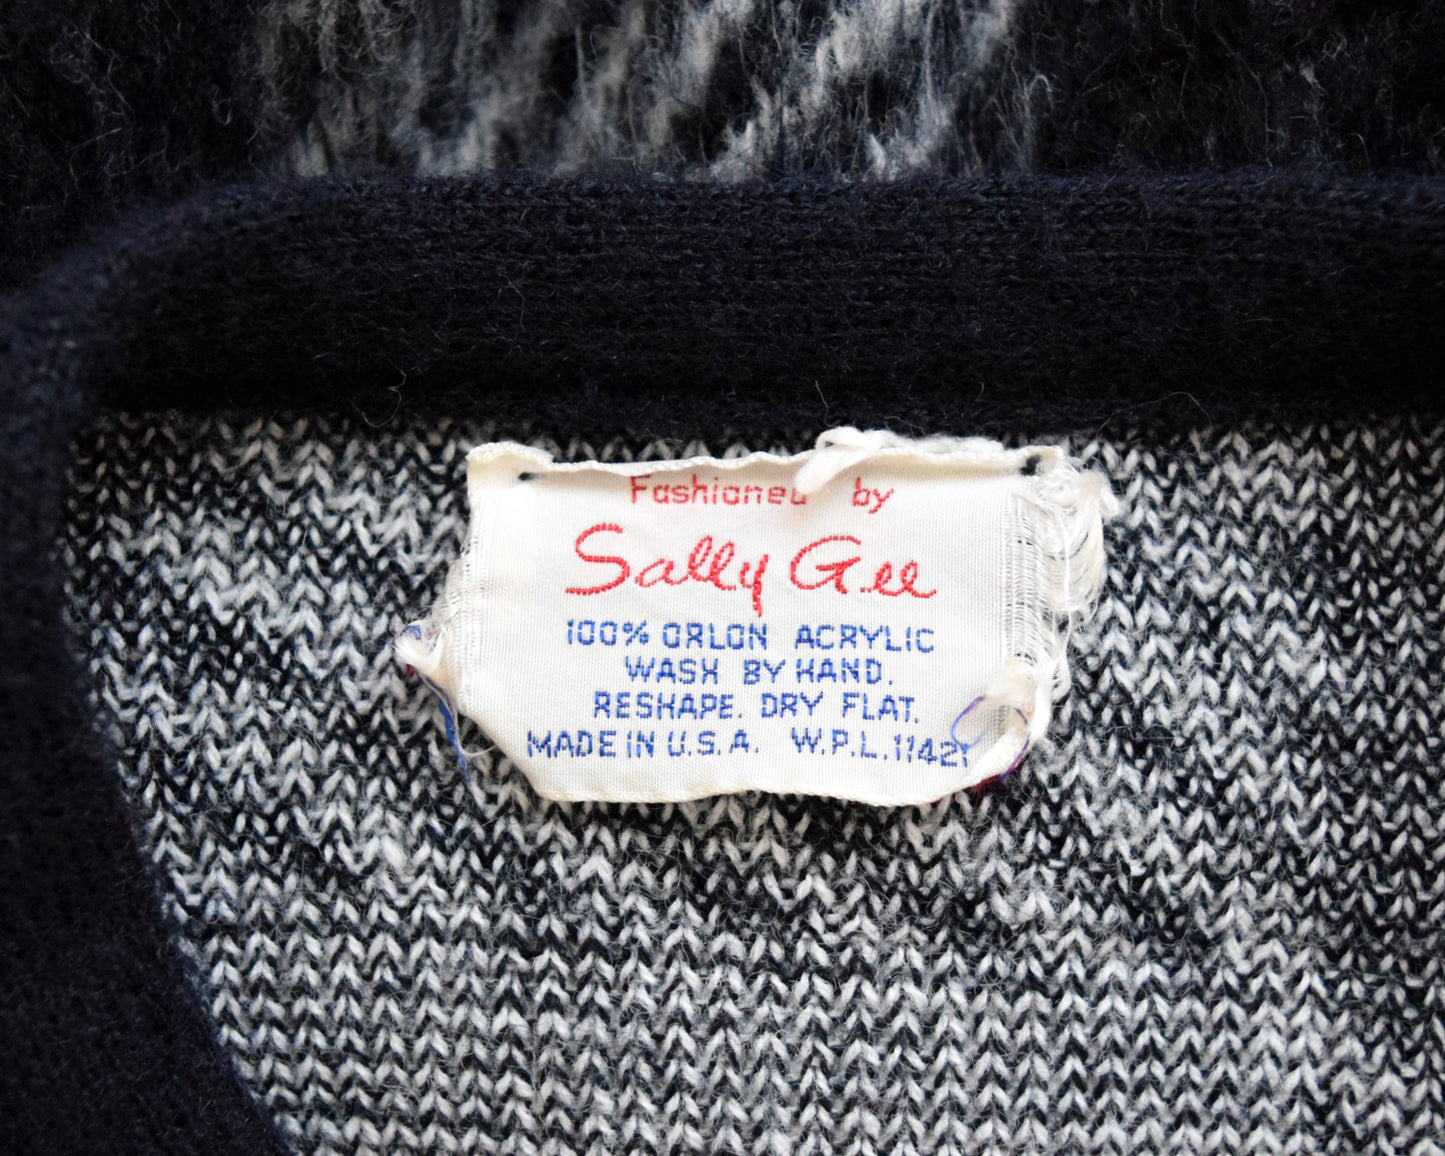 Close up of the tag which says Sally Gee